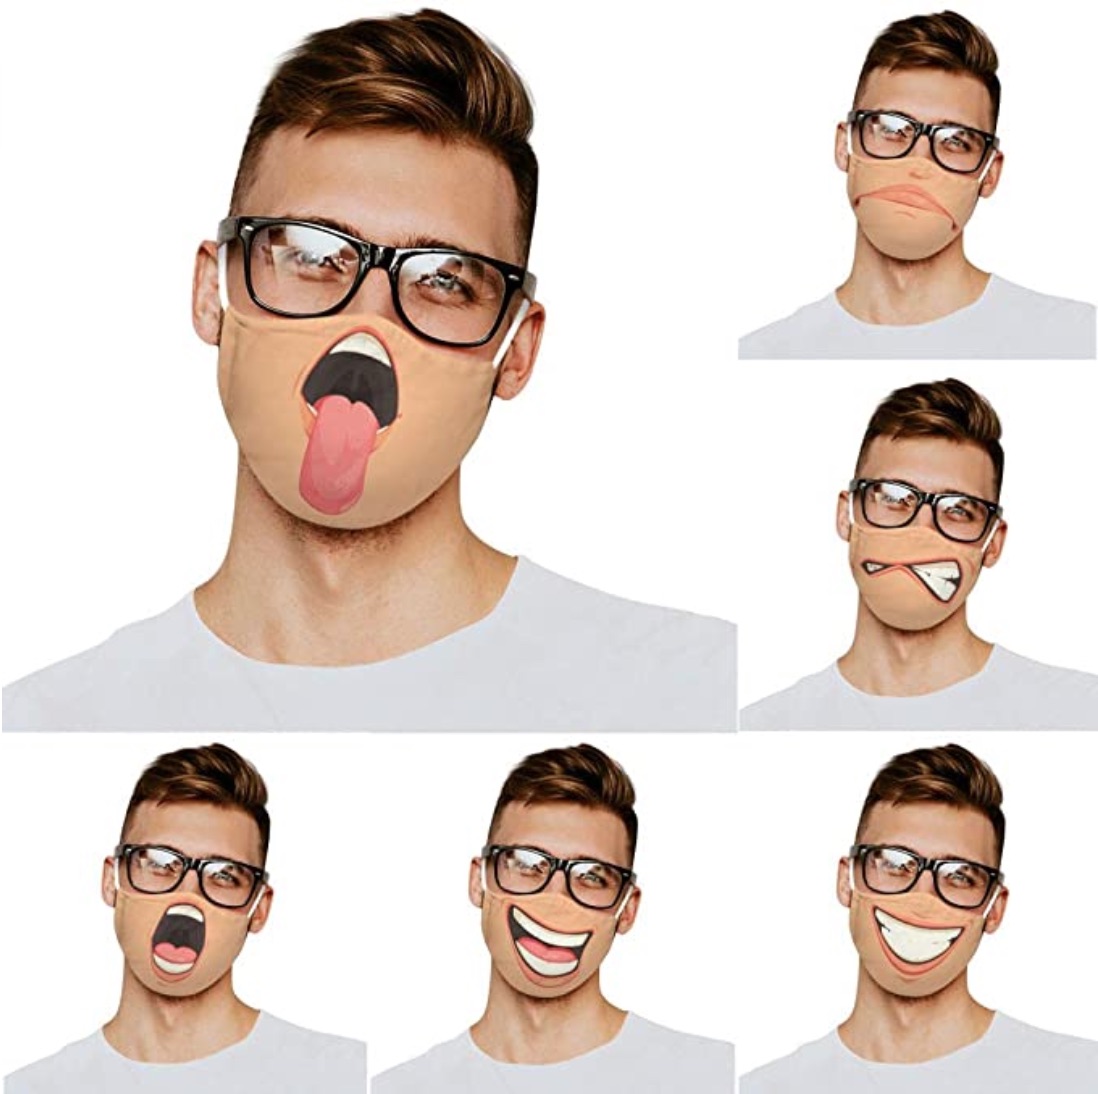 Emoji style face coverings